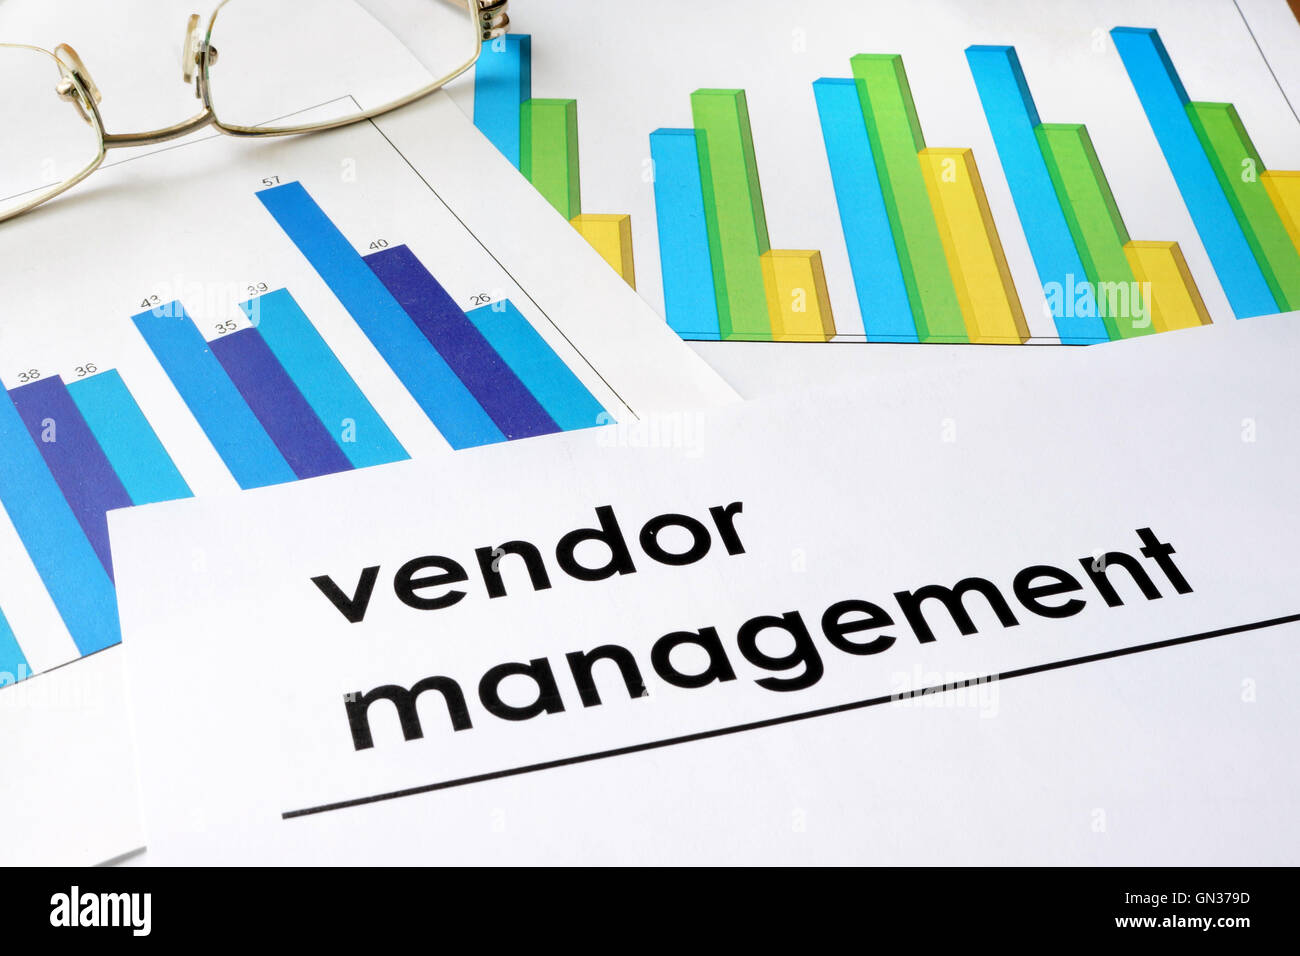 Paper with words Vendor management and charts. Stock Photo